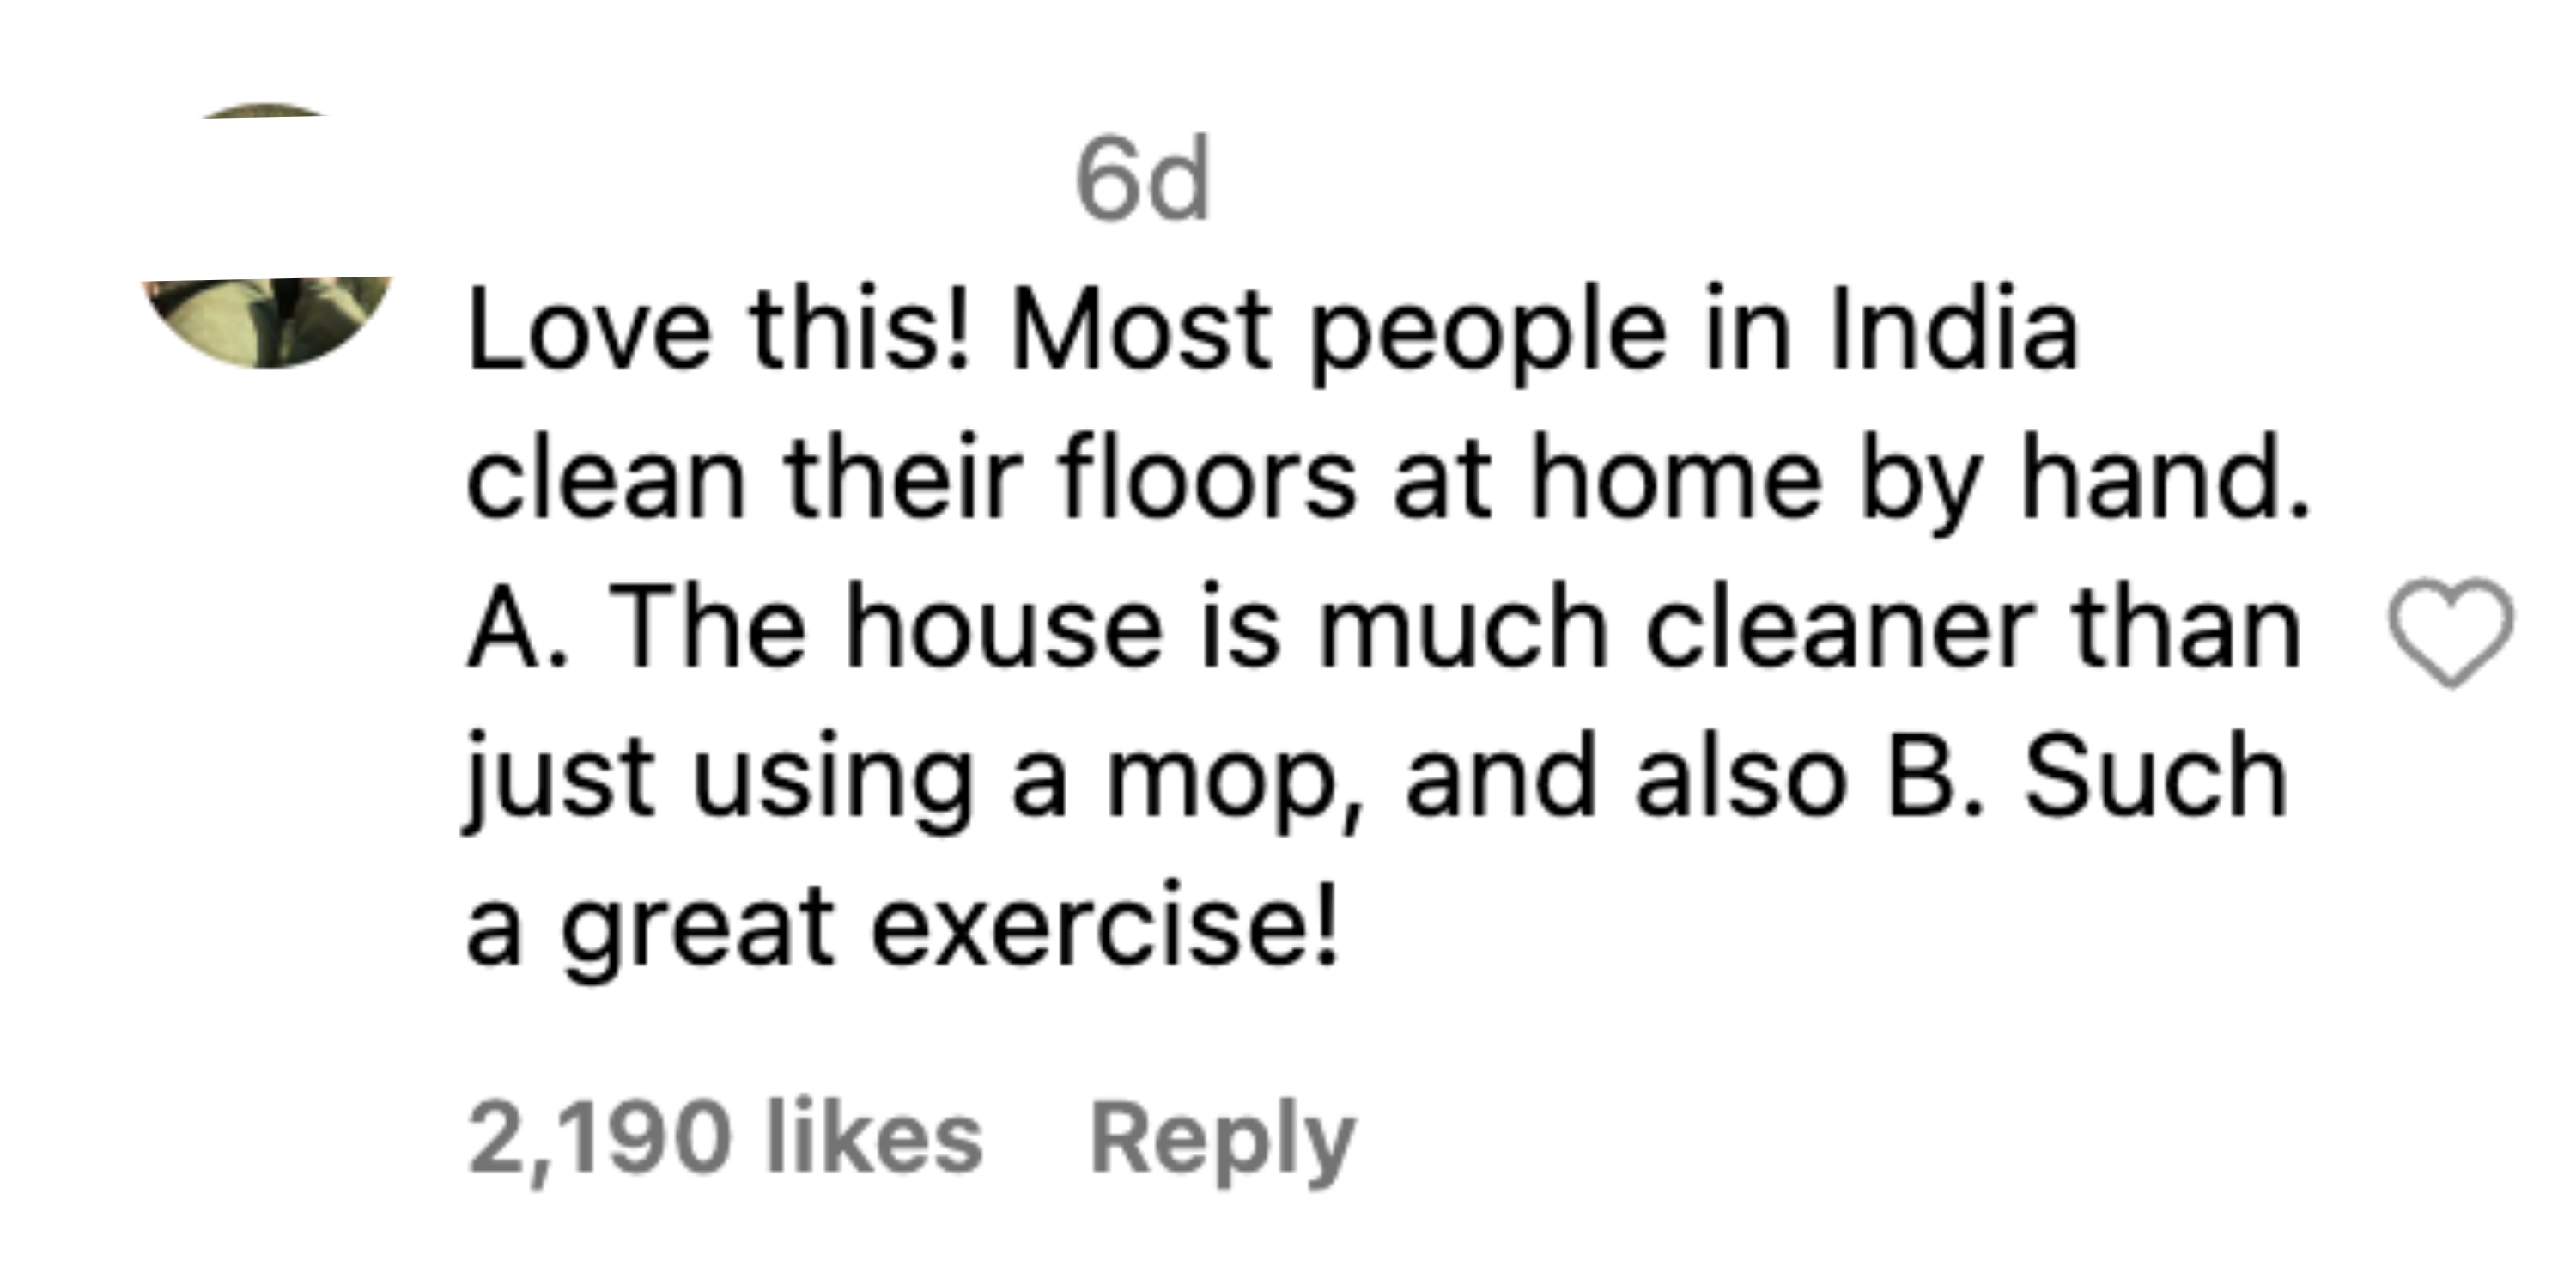 Instagram comment by letsdiscoh: &quot;Love this! Most people in India clean their floors at home by hand. A. The house is much cleaner than just using a mop, and also B. Such a great exercise!&quot; 2,190 likes